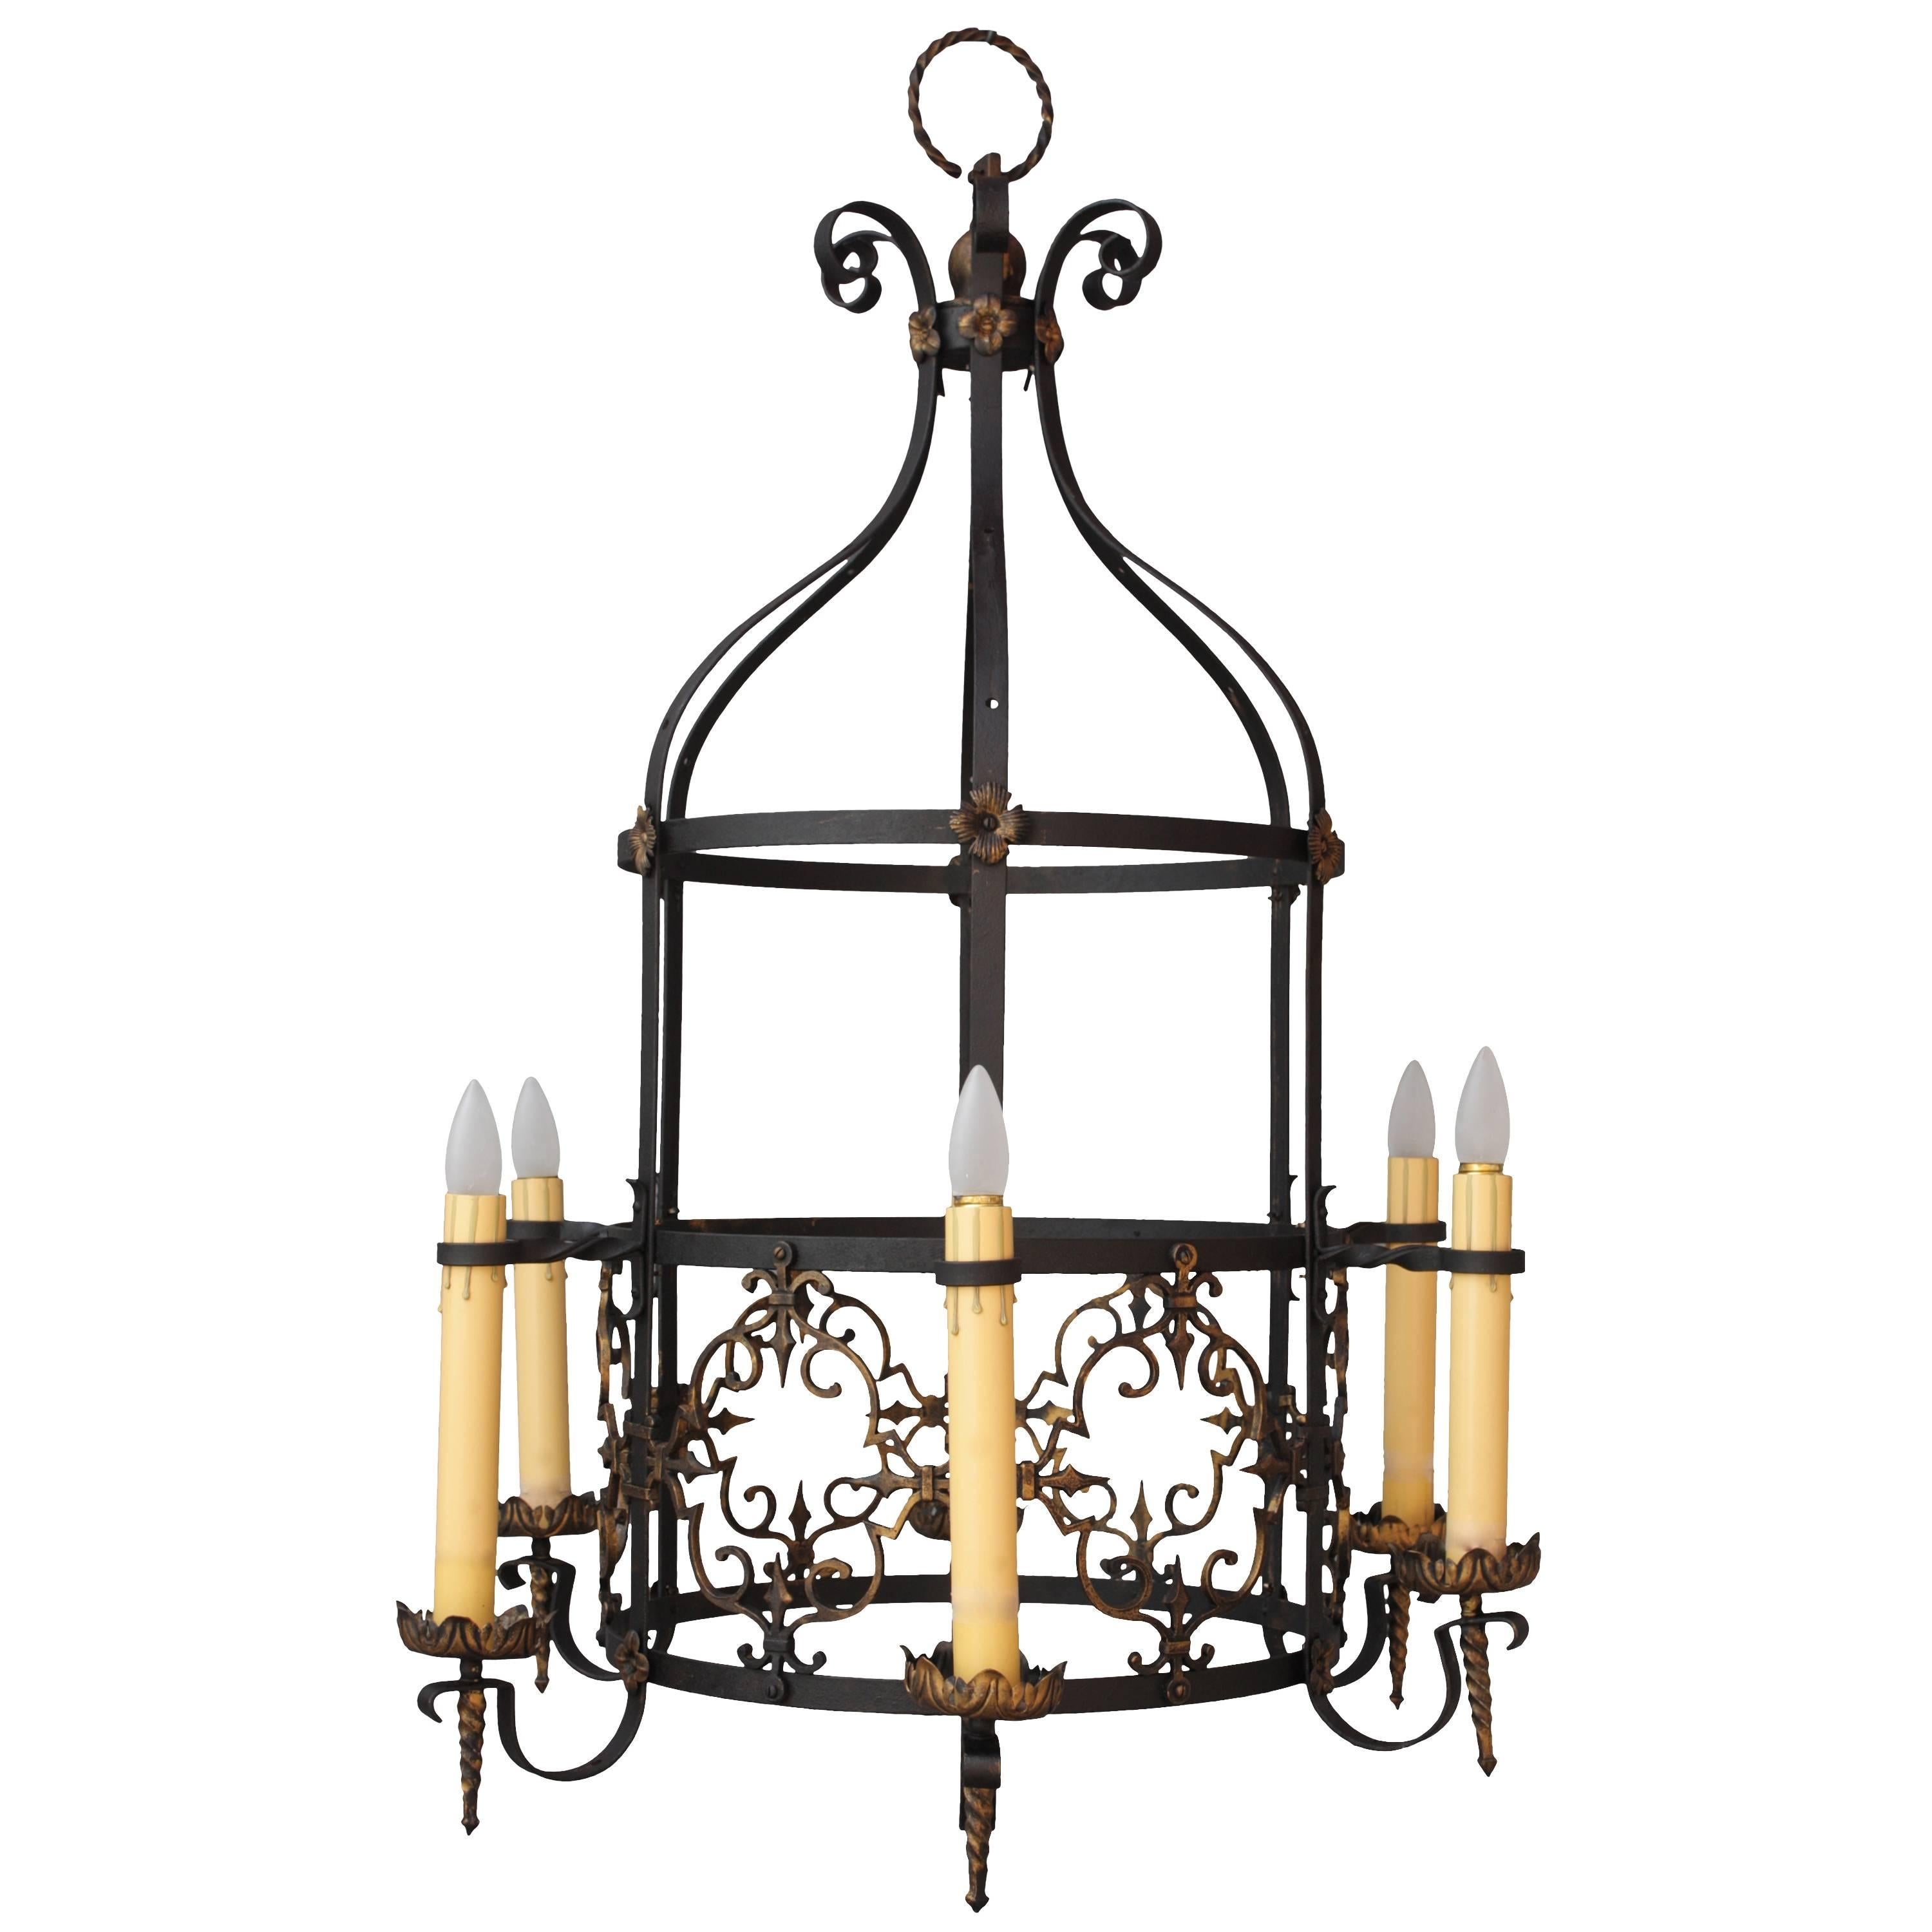 Exceptional Spanish Revival Large-Scale Bronze and Iron Chandelier